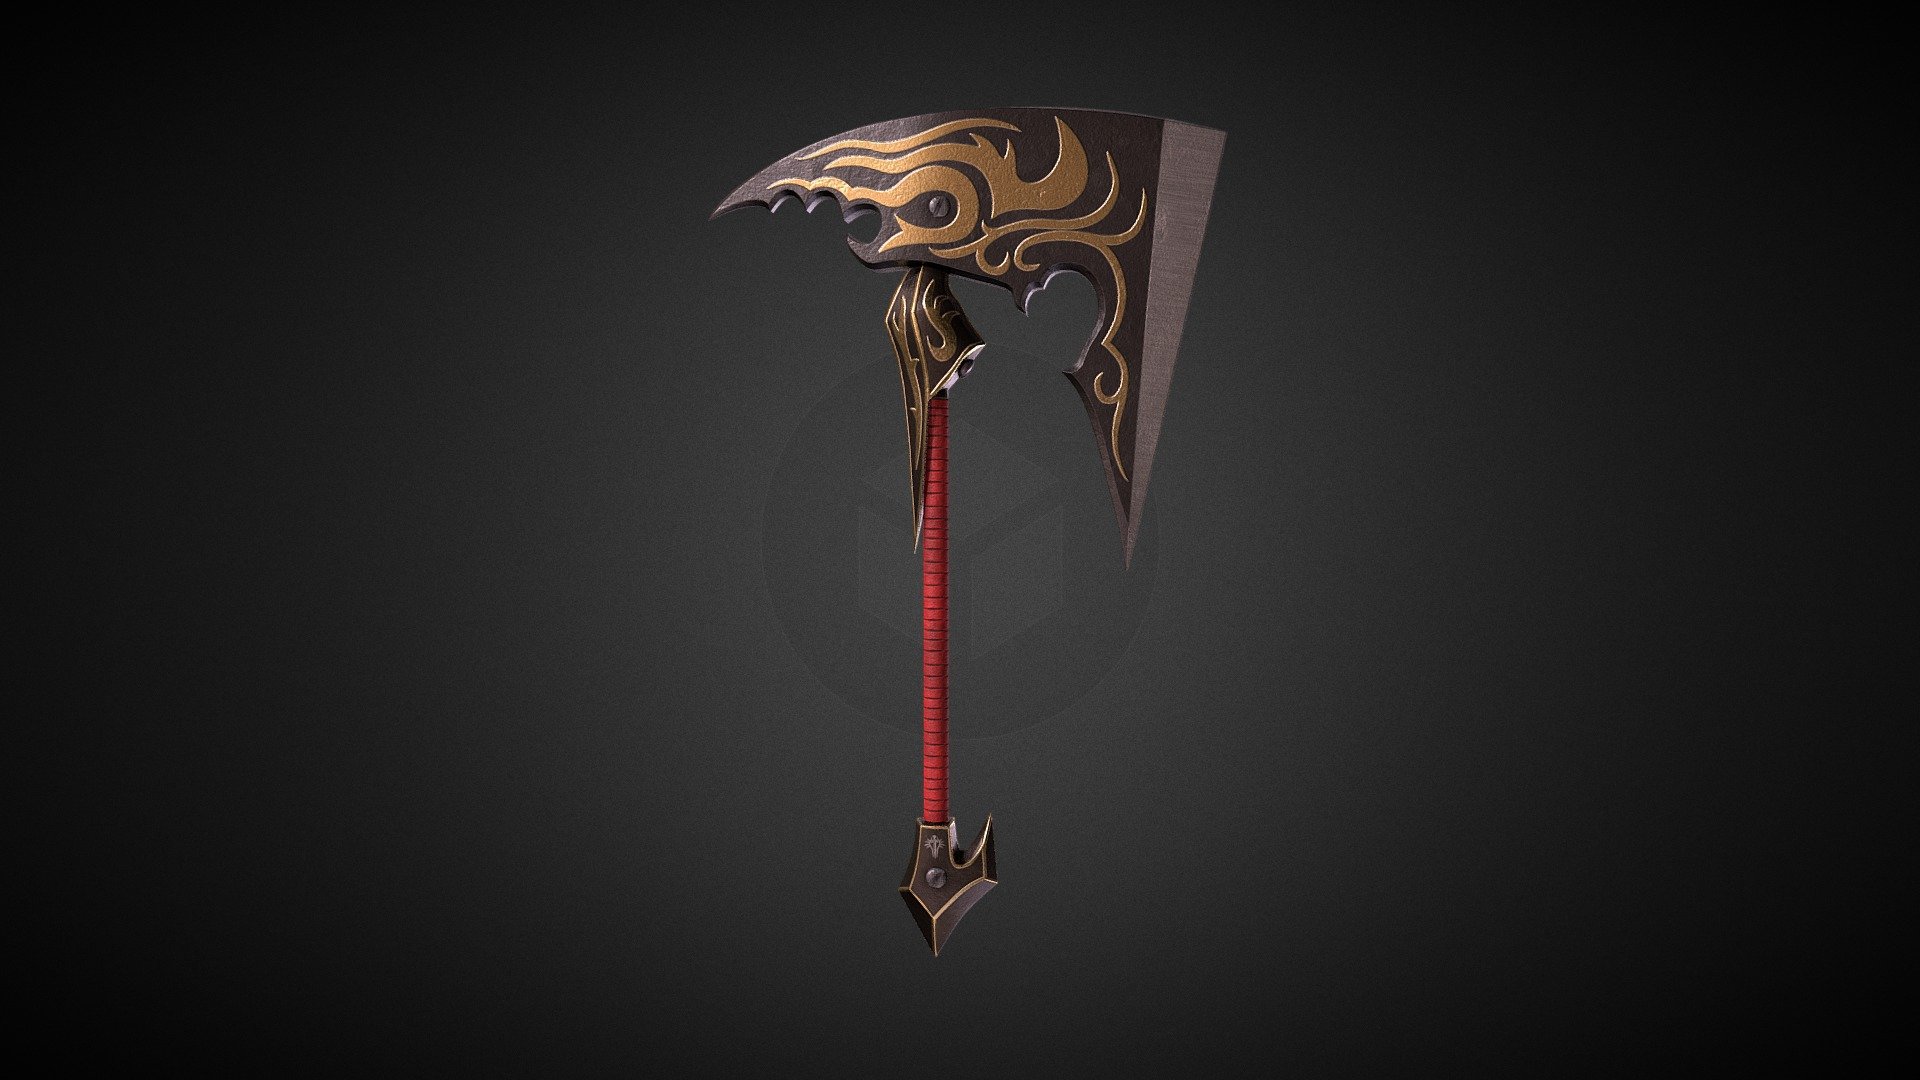 The Legionnaire Axe from Guild Wars 2, with a few modifications for my Blood Legion warrior.

I've used it in a few rendered scenes since:


Legionnaire Axe
Horns, Claws, Fangs
Heavy the Chains of our Warmachines
Kianga Snowstorm - Full Body Sculpt

Modeled in Blender, painted in Substance Painter 3d model